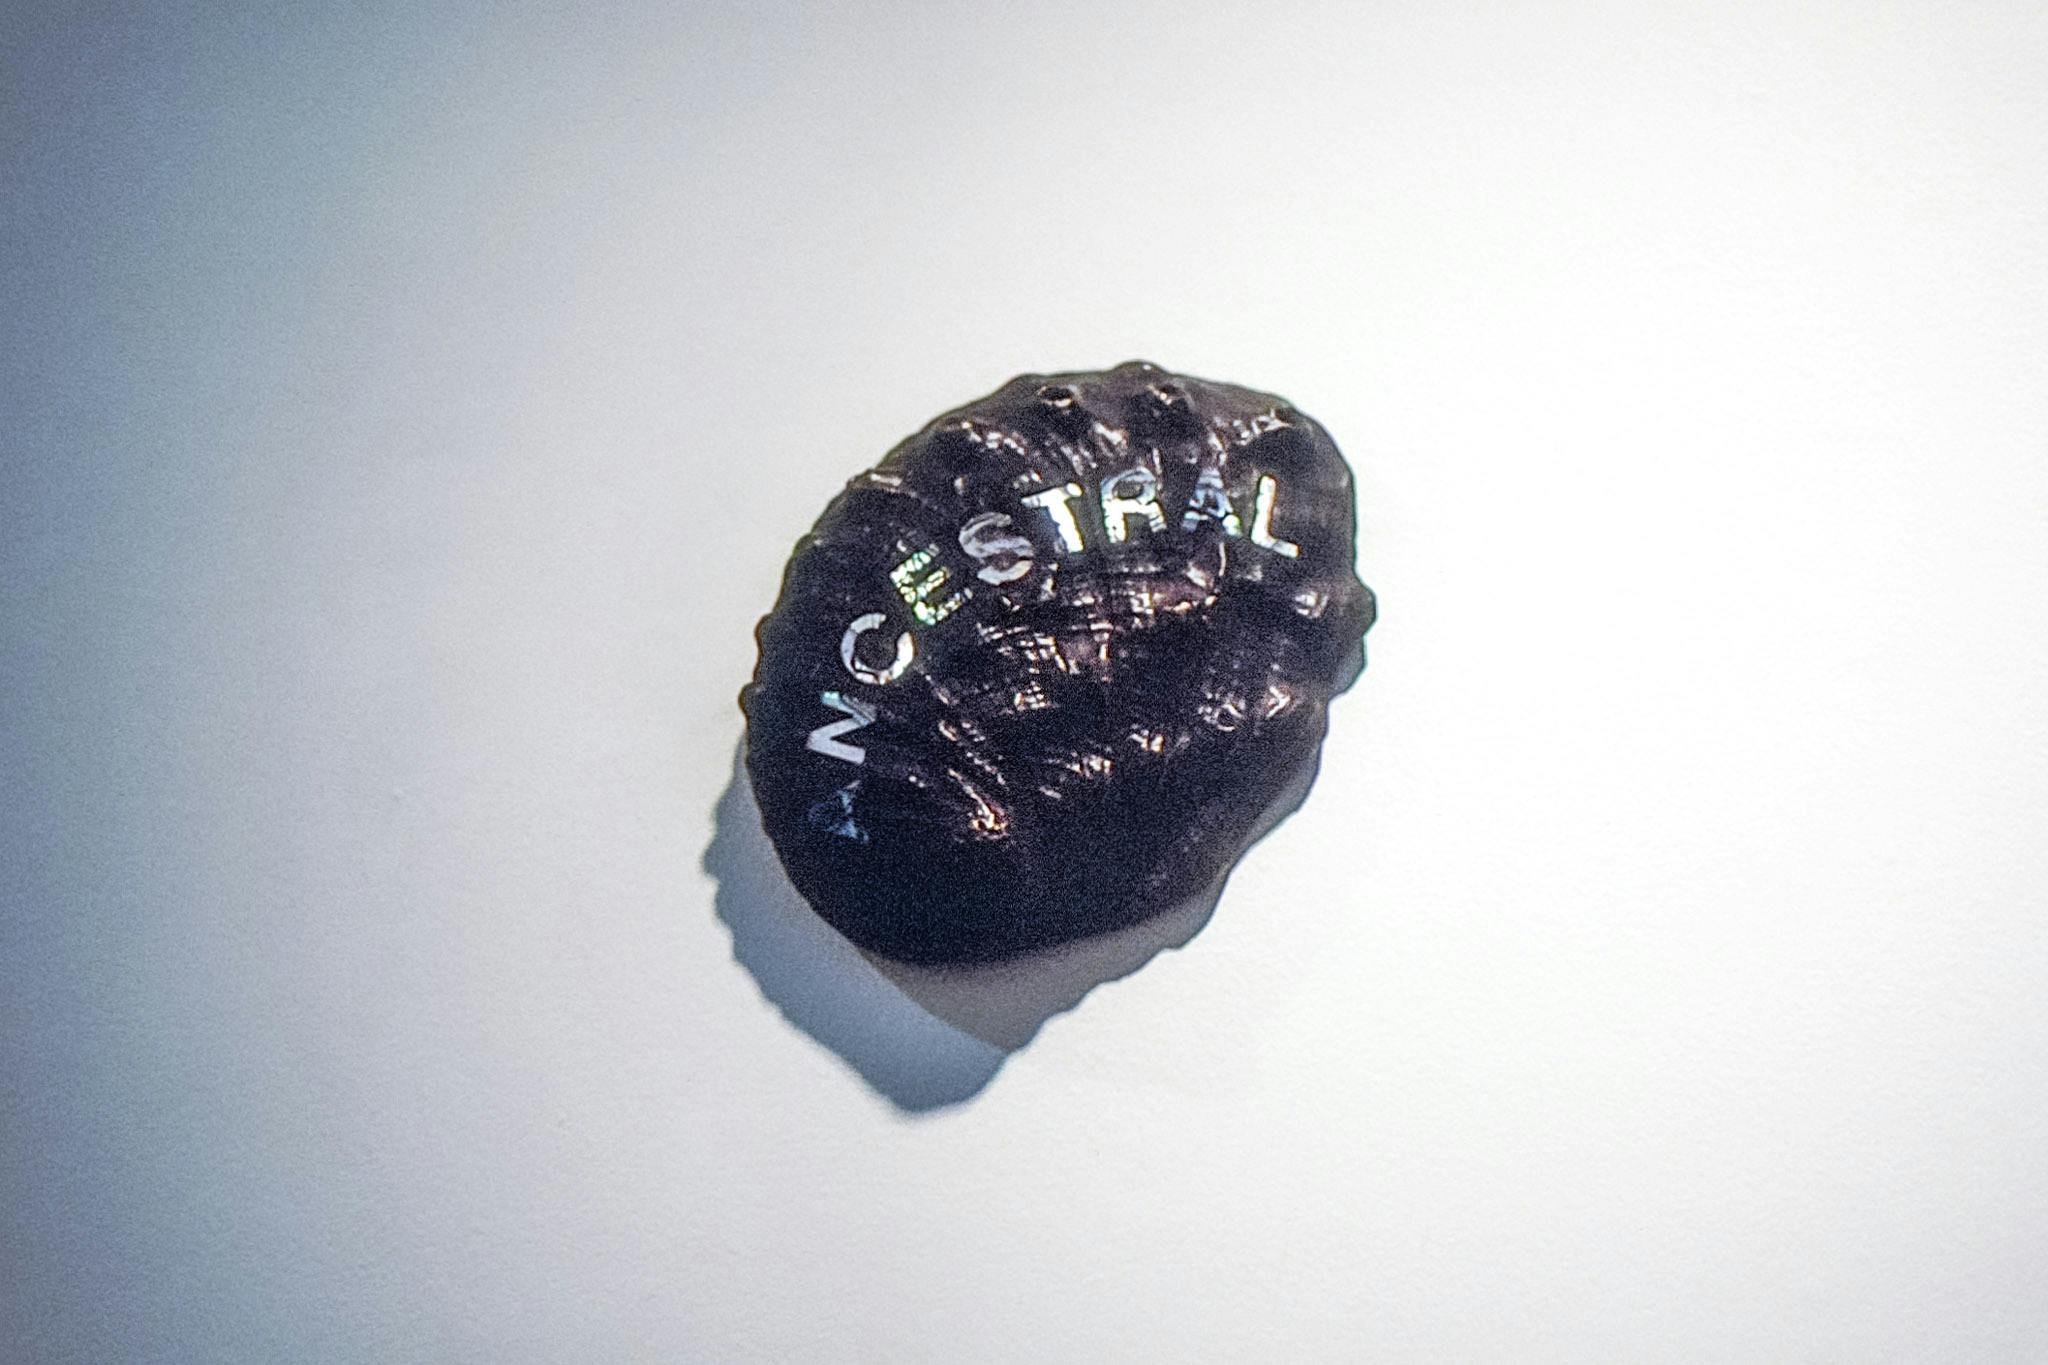 A close-up photo of a shell sculpture mounted on a white gallery wall. On the black surface of the round-shaped shell, the word ANCESTRAL is curved to show the mother-of-pearl inside.